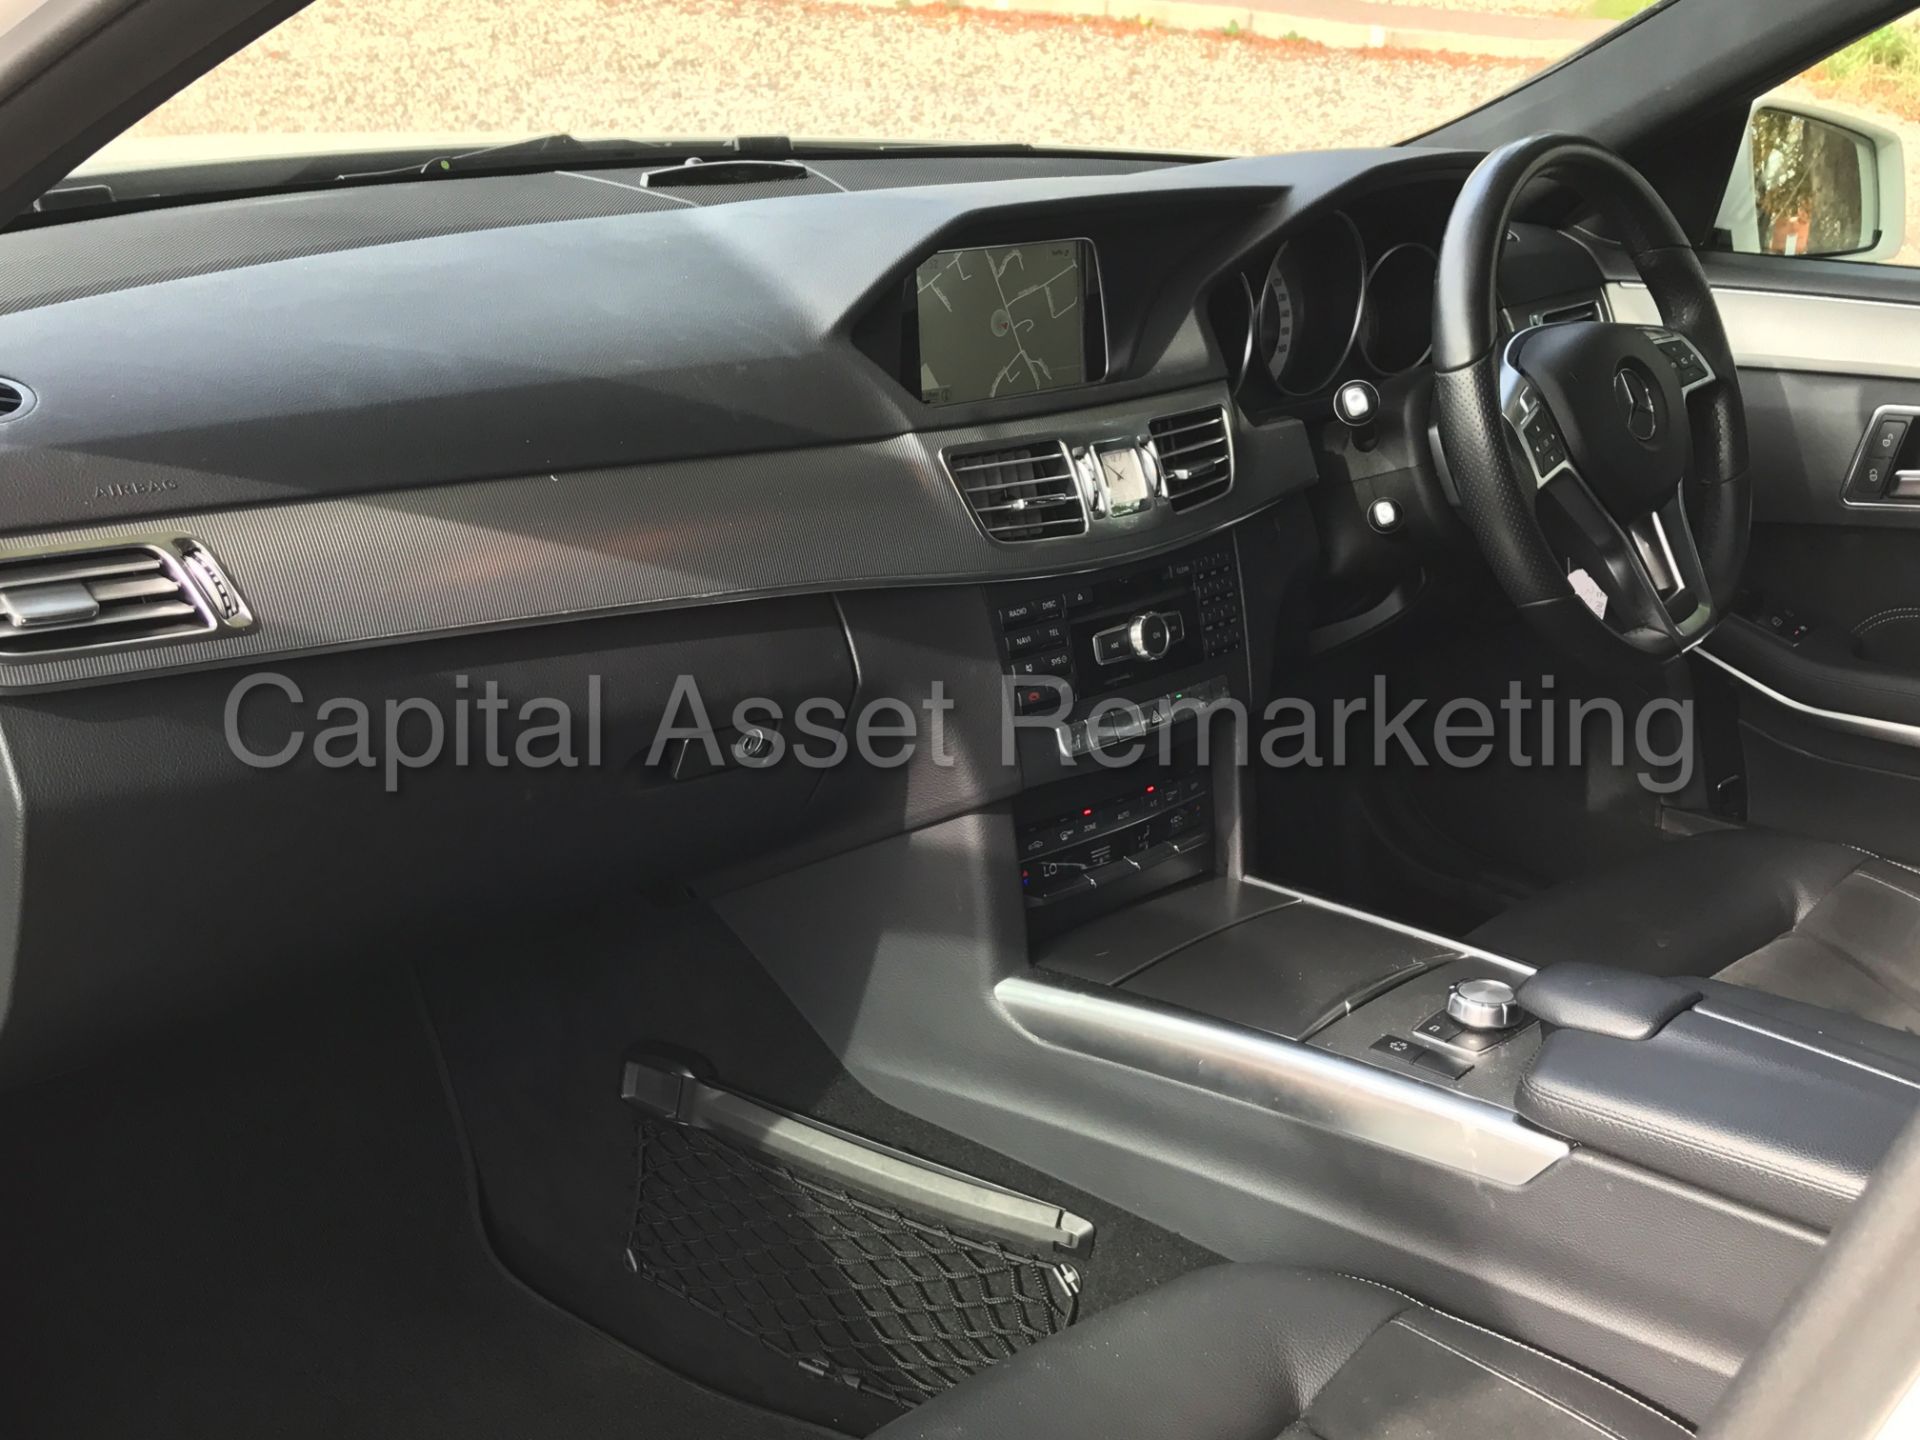 MERCEDES-BENZ E220 'AMG SPORT' (2015 MODEL) 'SALOON - AUTO - PAN ROOF - SAT NAV - LEATHER' *LOOK* - Image 24 of 33